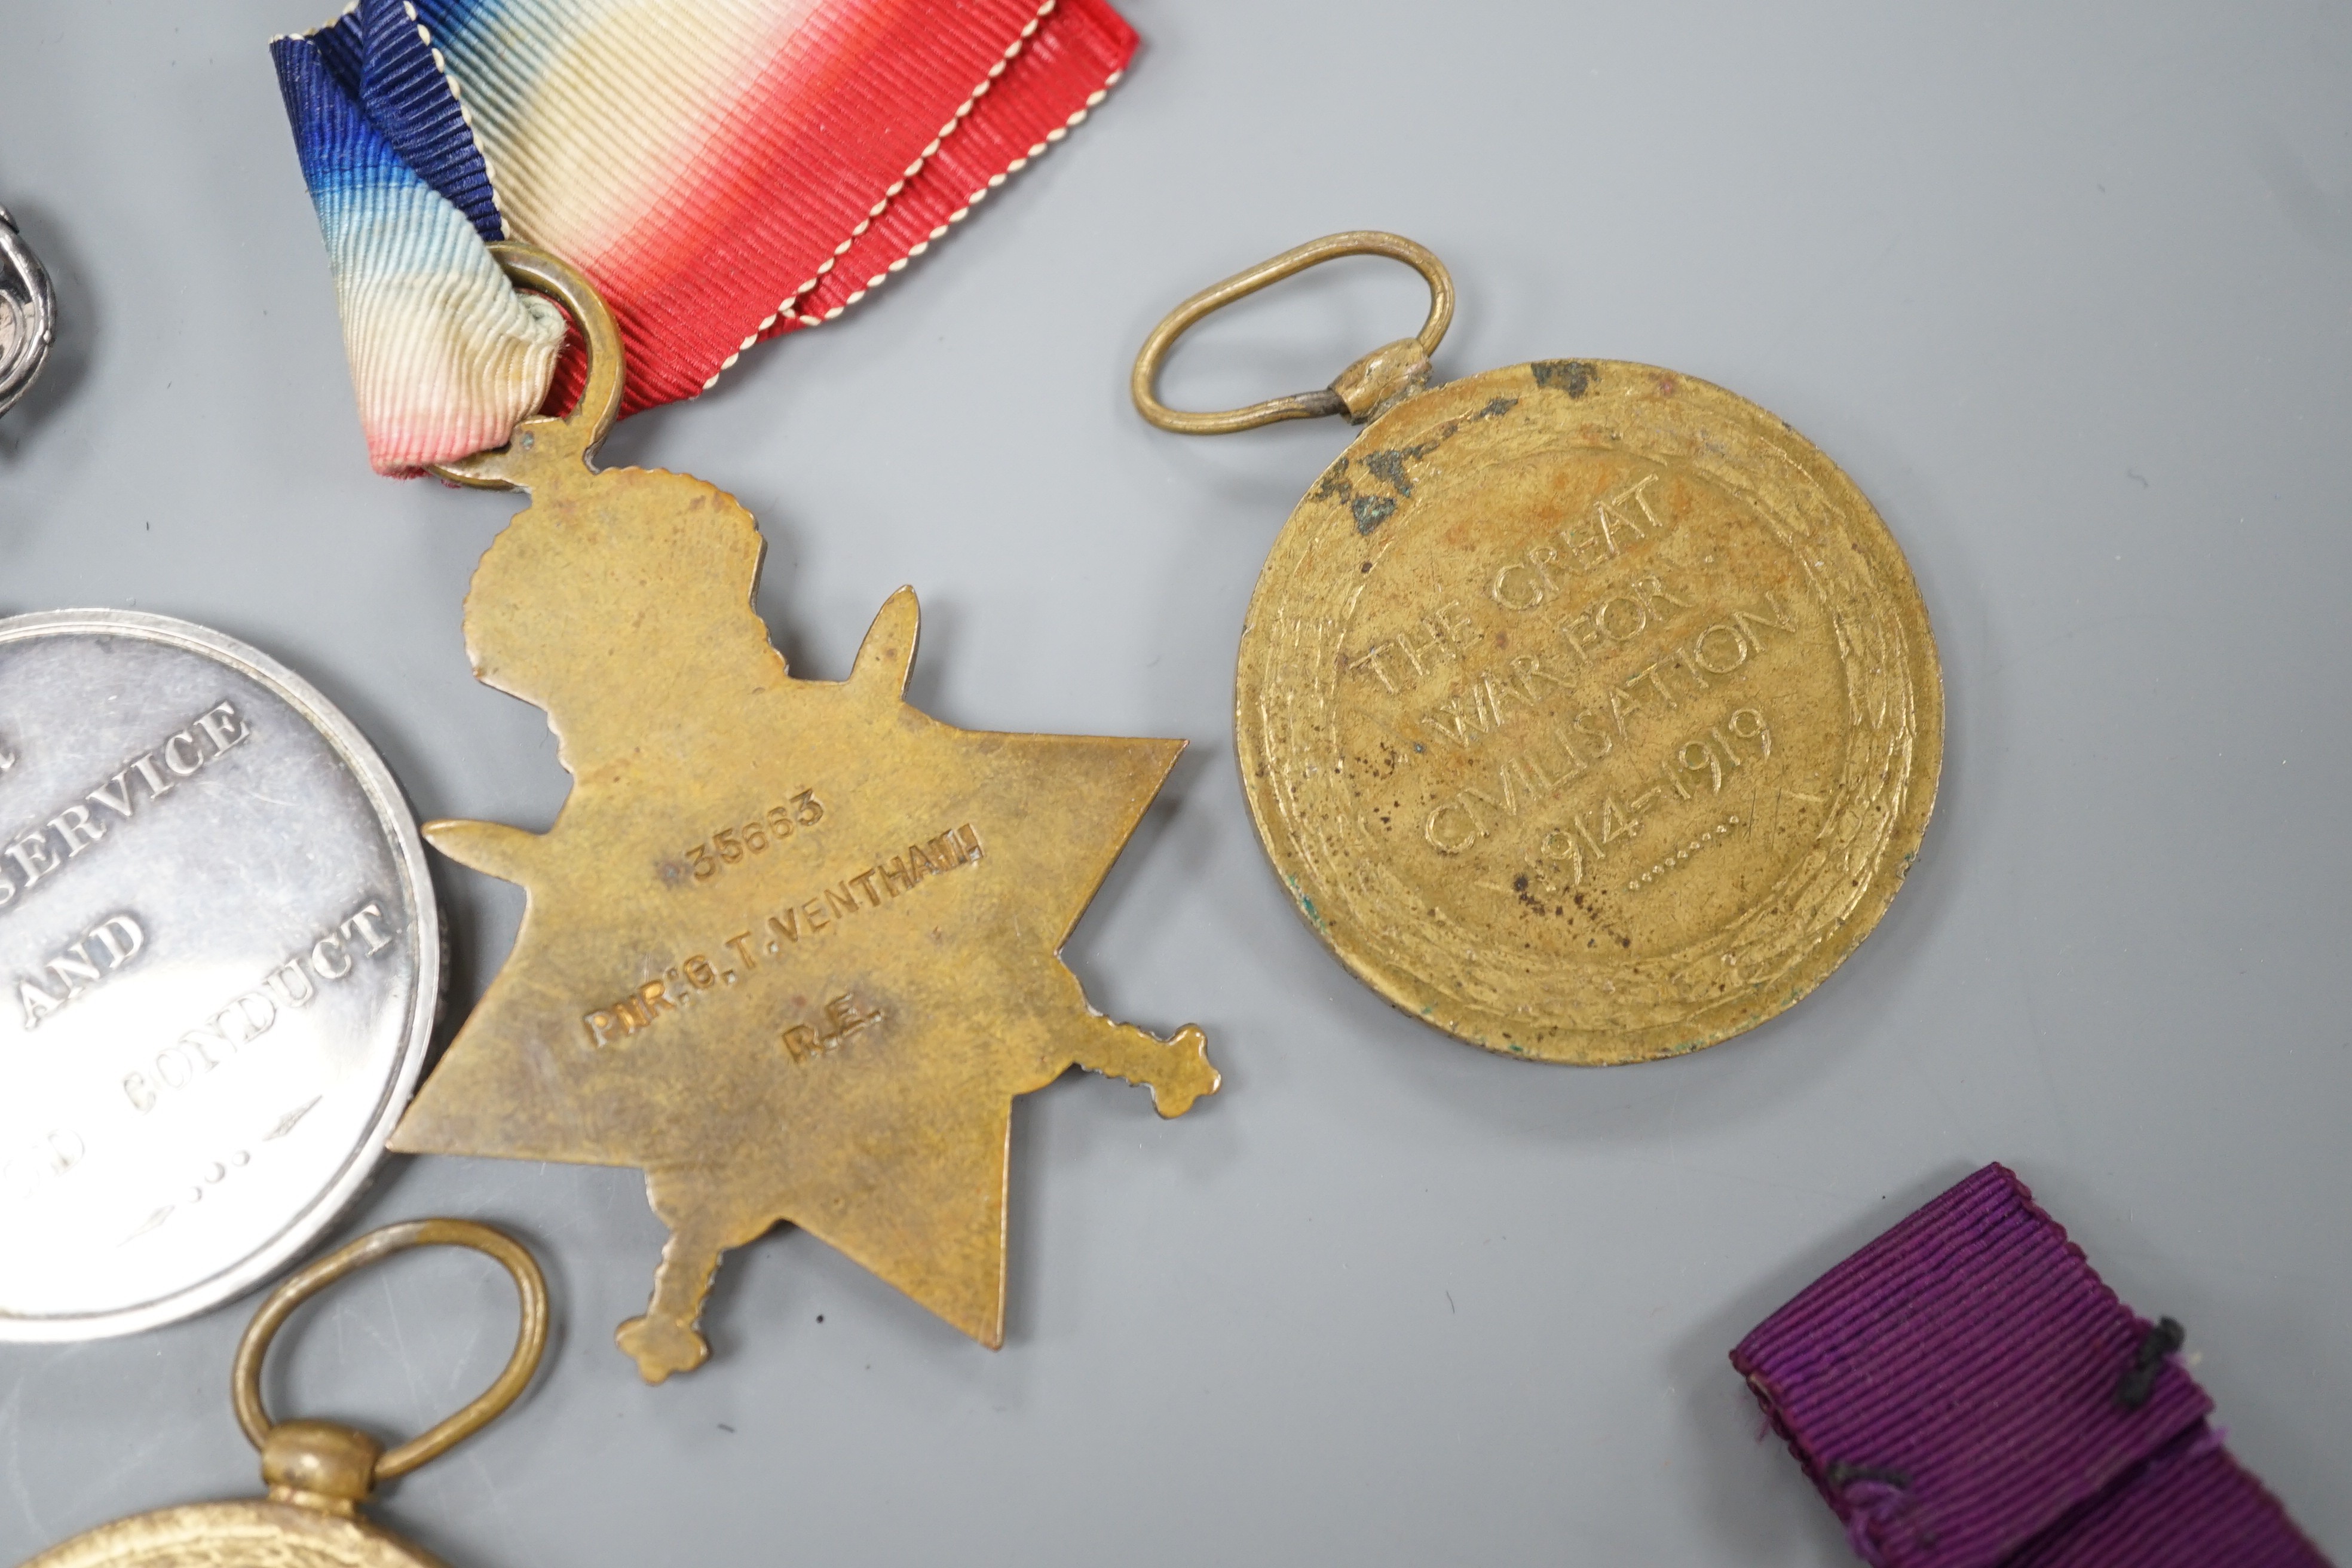 WWI and George V medals to include